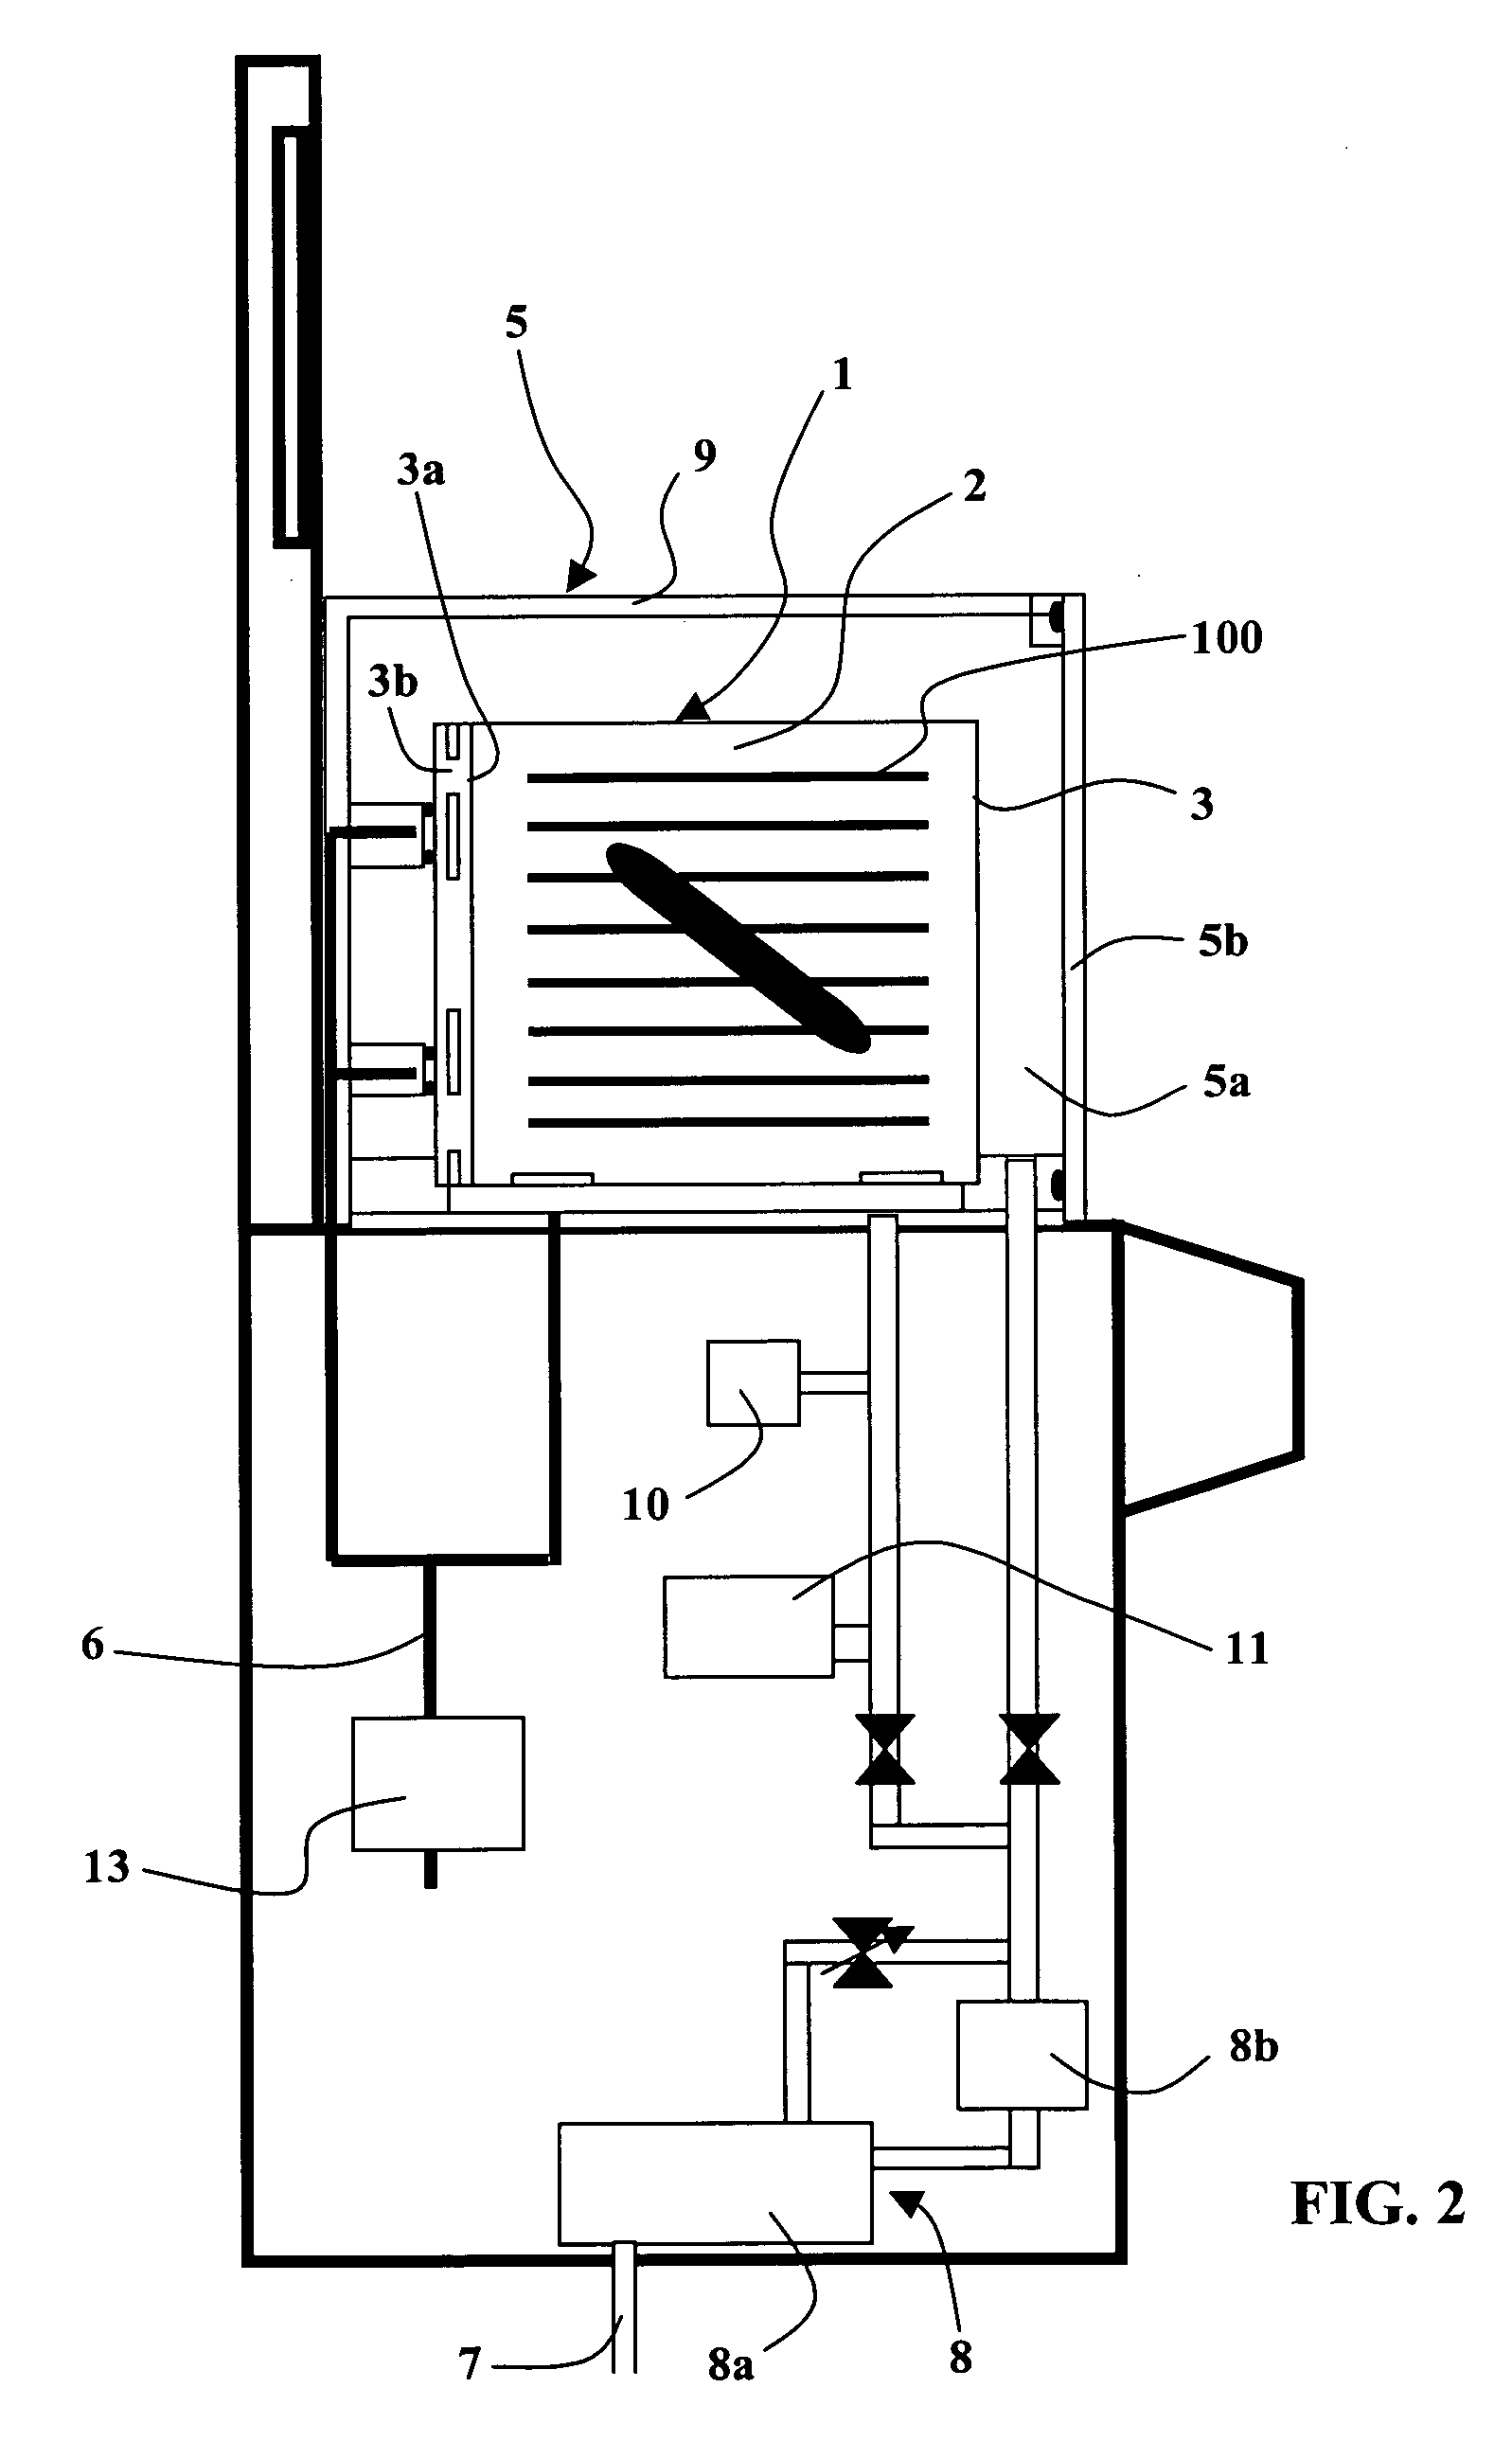 Method and Device for Removing Pollution From a Confined Environment